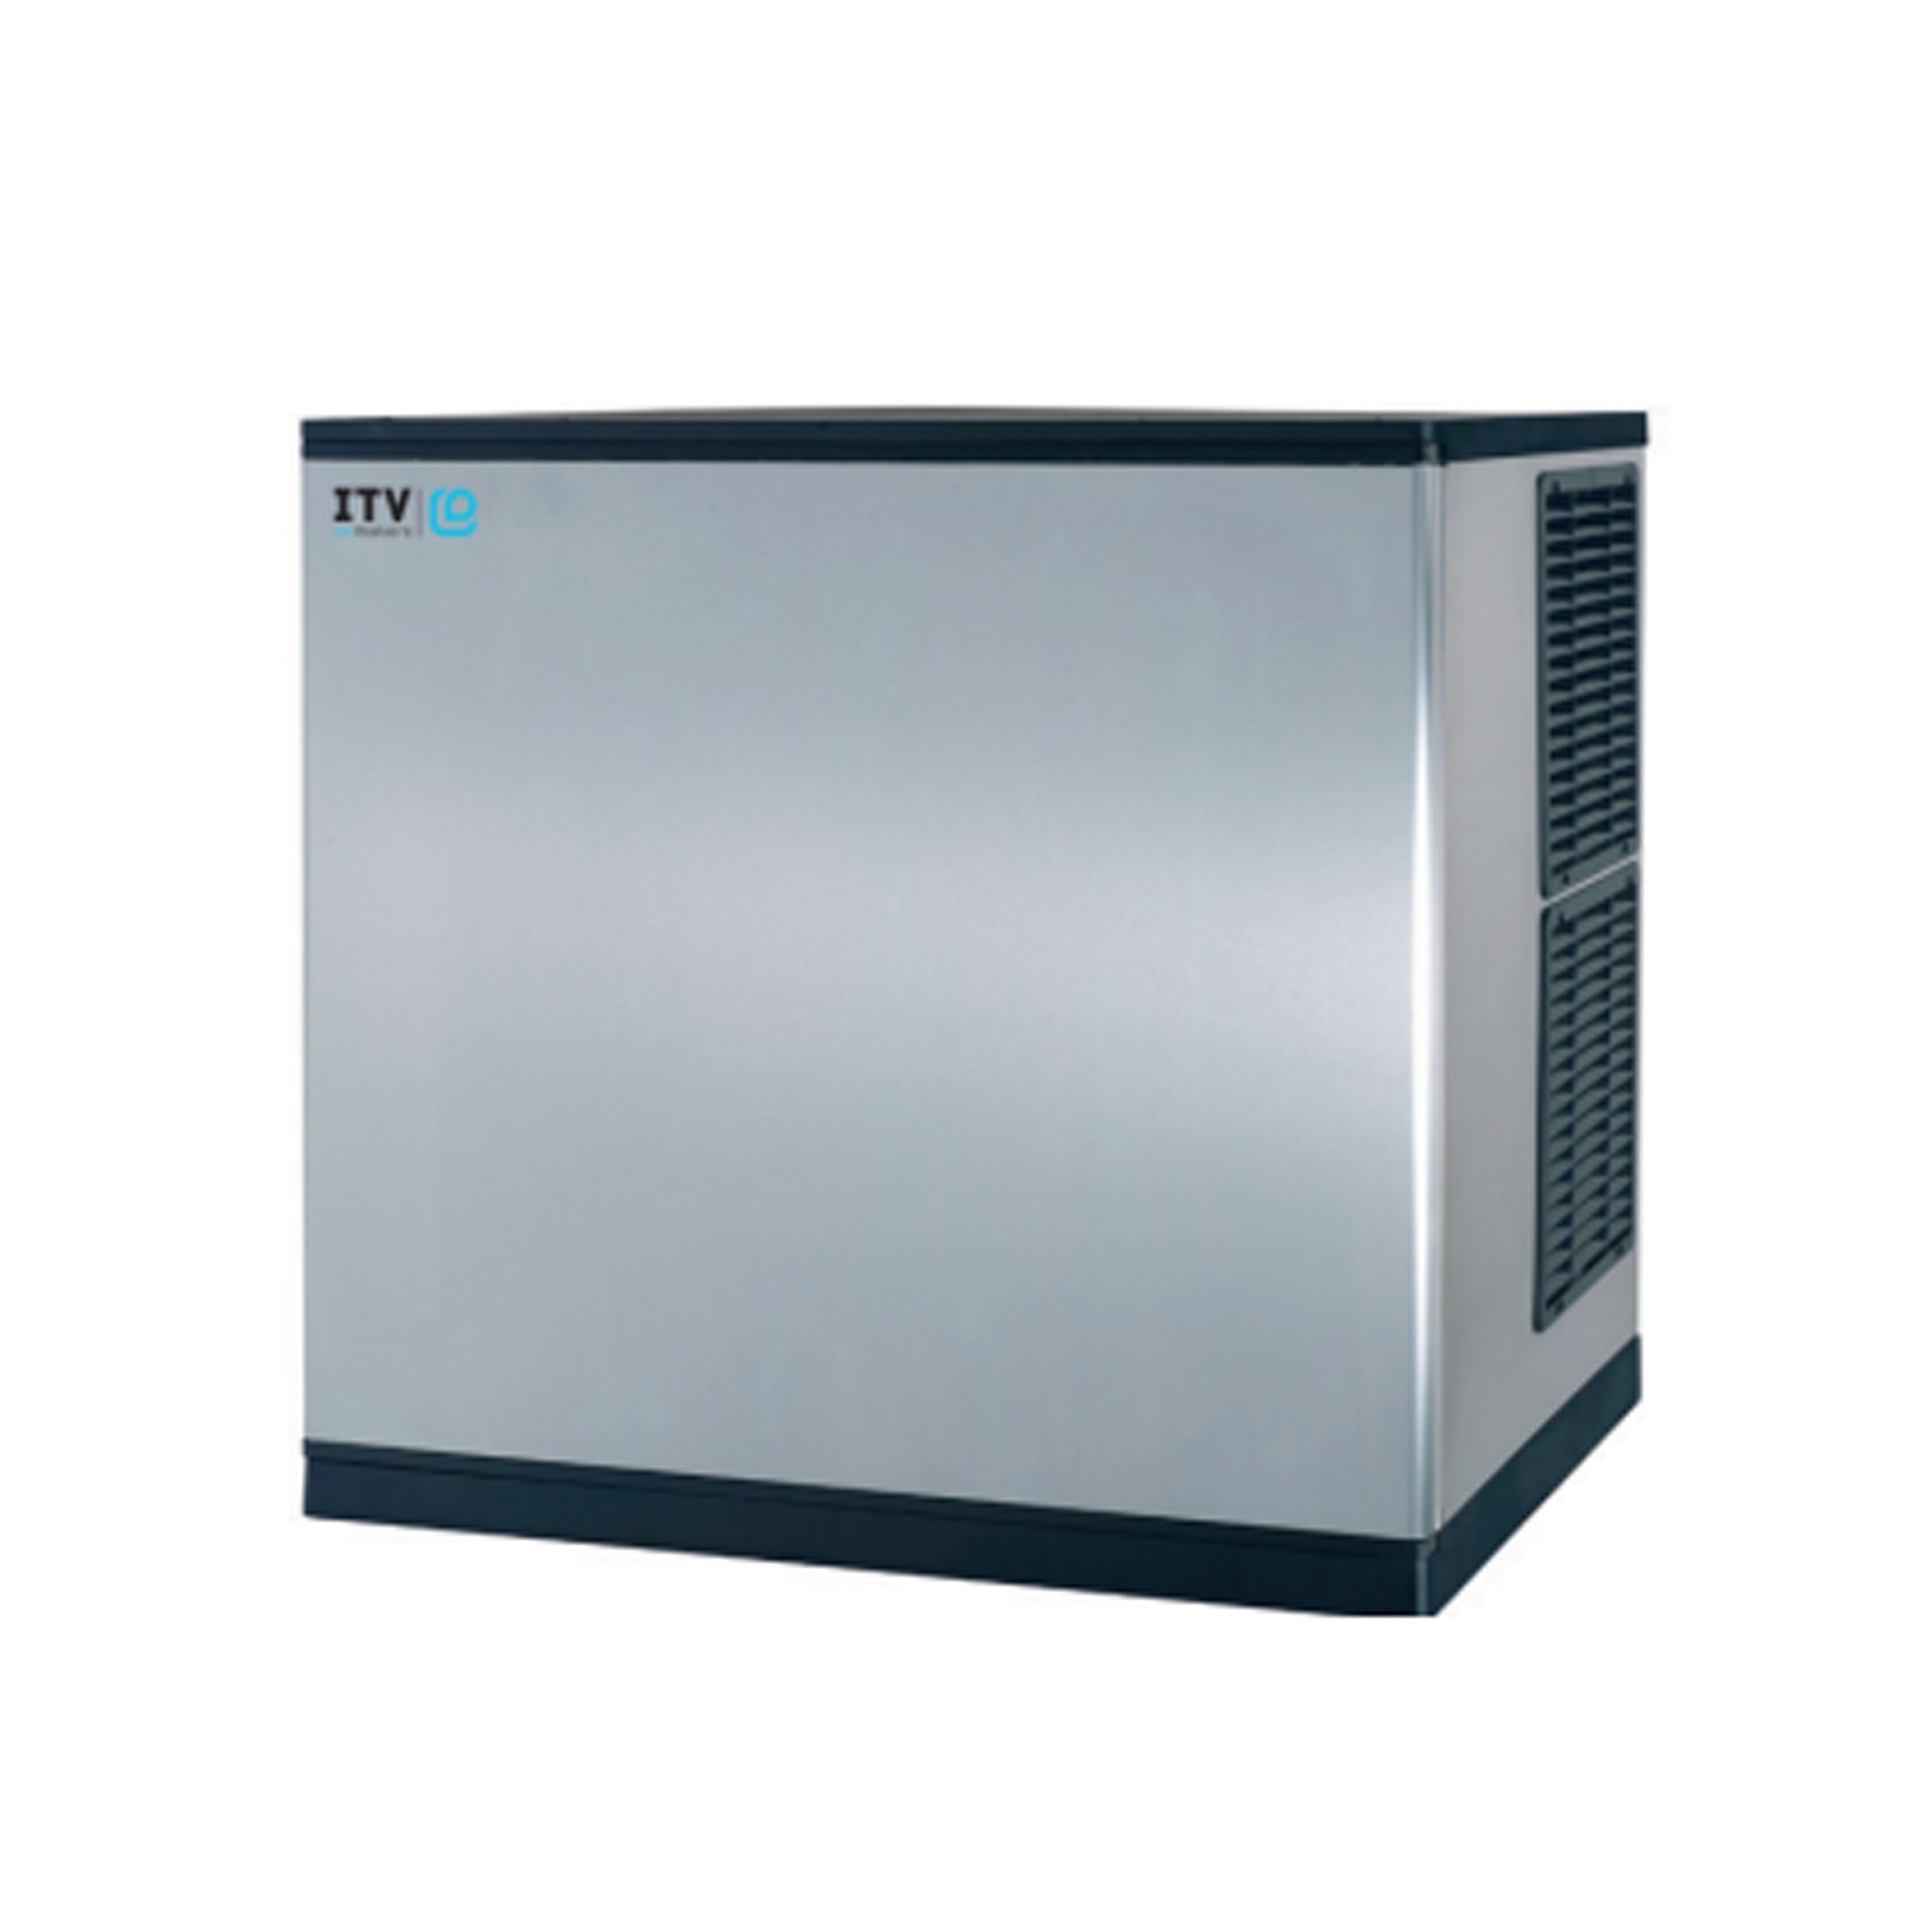 ITV - SPIKA MS 1000 (2) W, Commercial Spika Cubers Ice Maker Modular Ice Cube Machine 974lbs